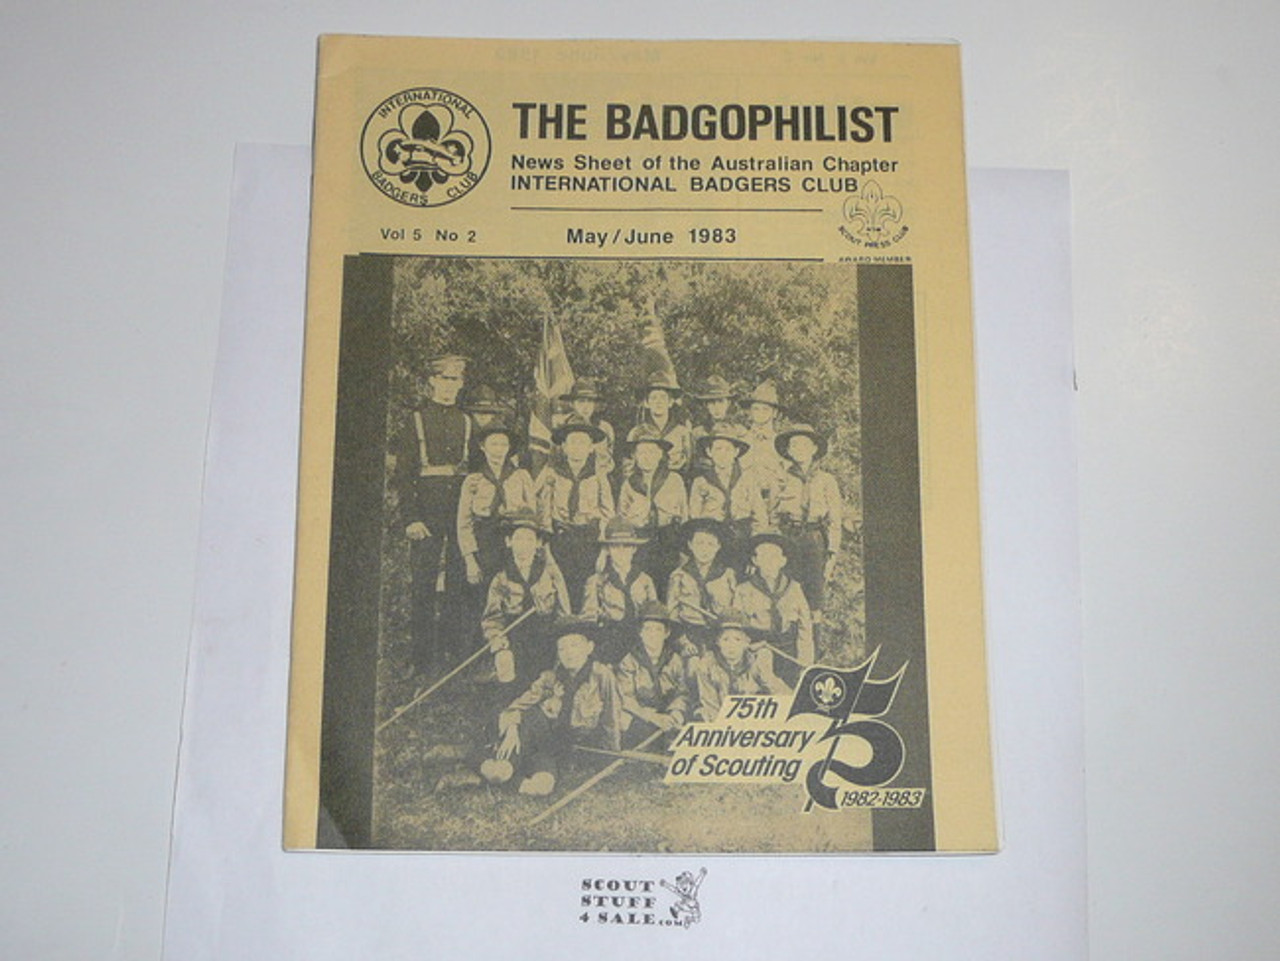 The Badgophilist, Newsletter of the Australian Branch of the International Badger clubb, 1983 May/June, Vol 5 #2